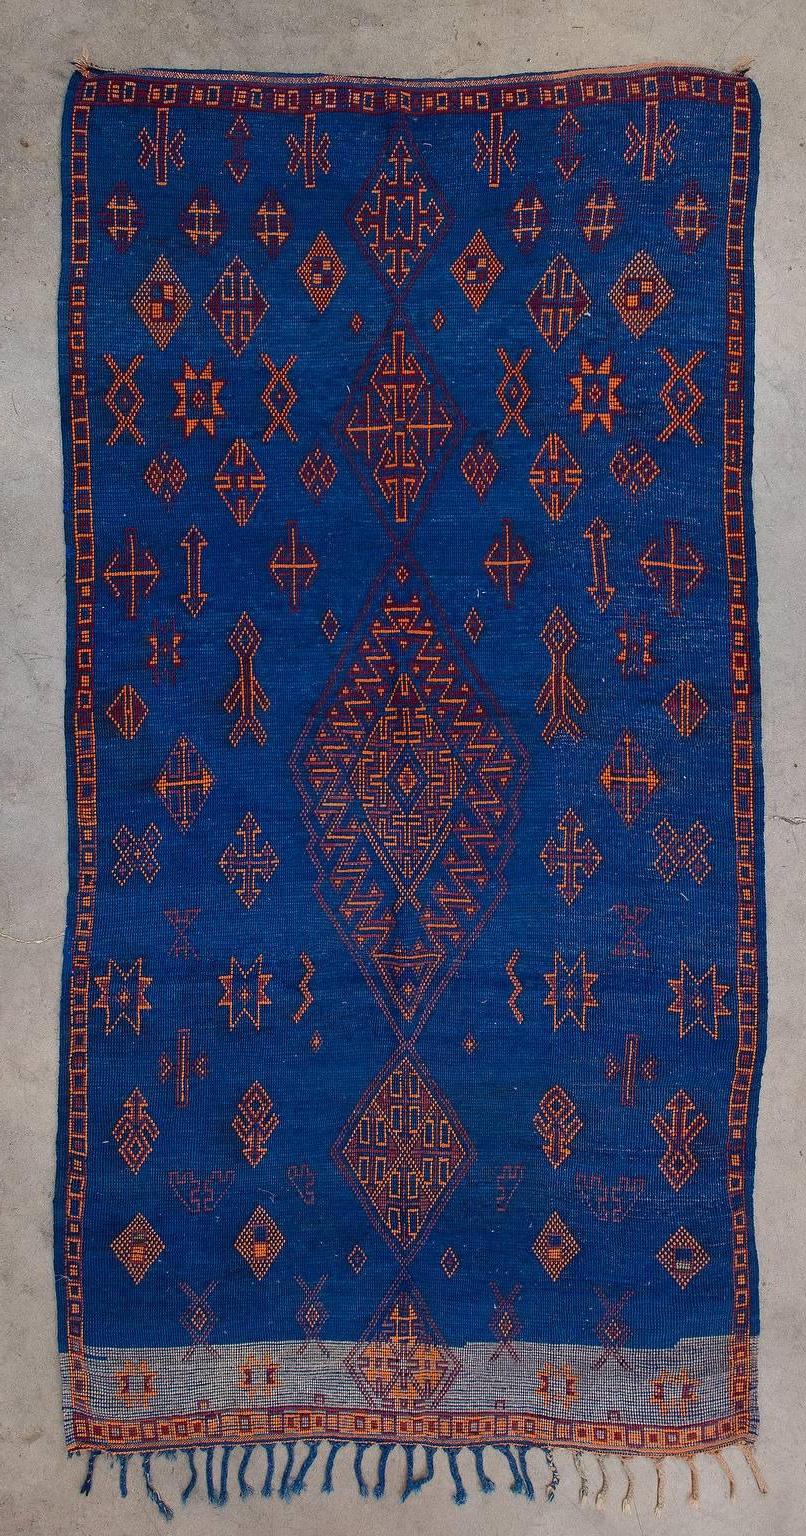 The Beni M'Guild tribe yields from the Middle Atlas region of Morocco. Their rugs tend to be very plush, woven to provide warmth and comfort during the winter months. Beni M'Guild rugs feature a well-known composition of diamonds in the